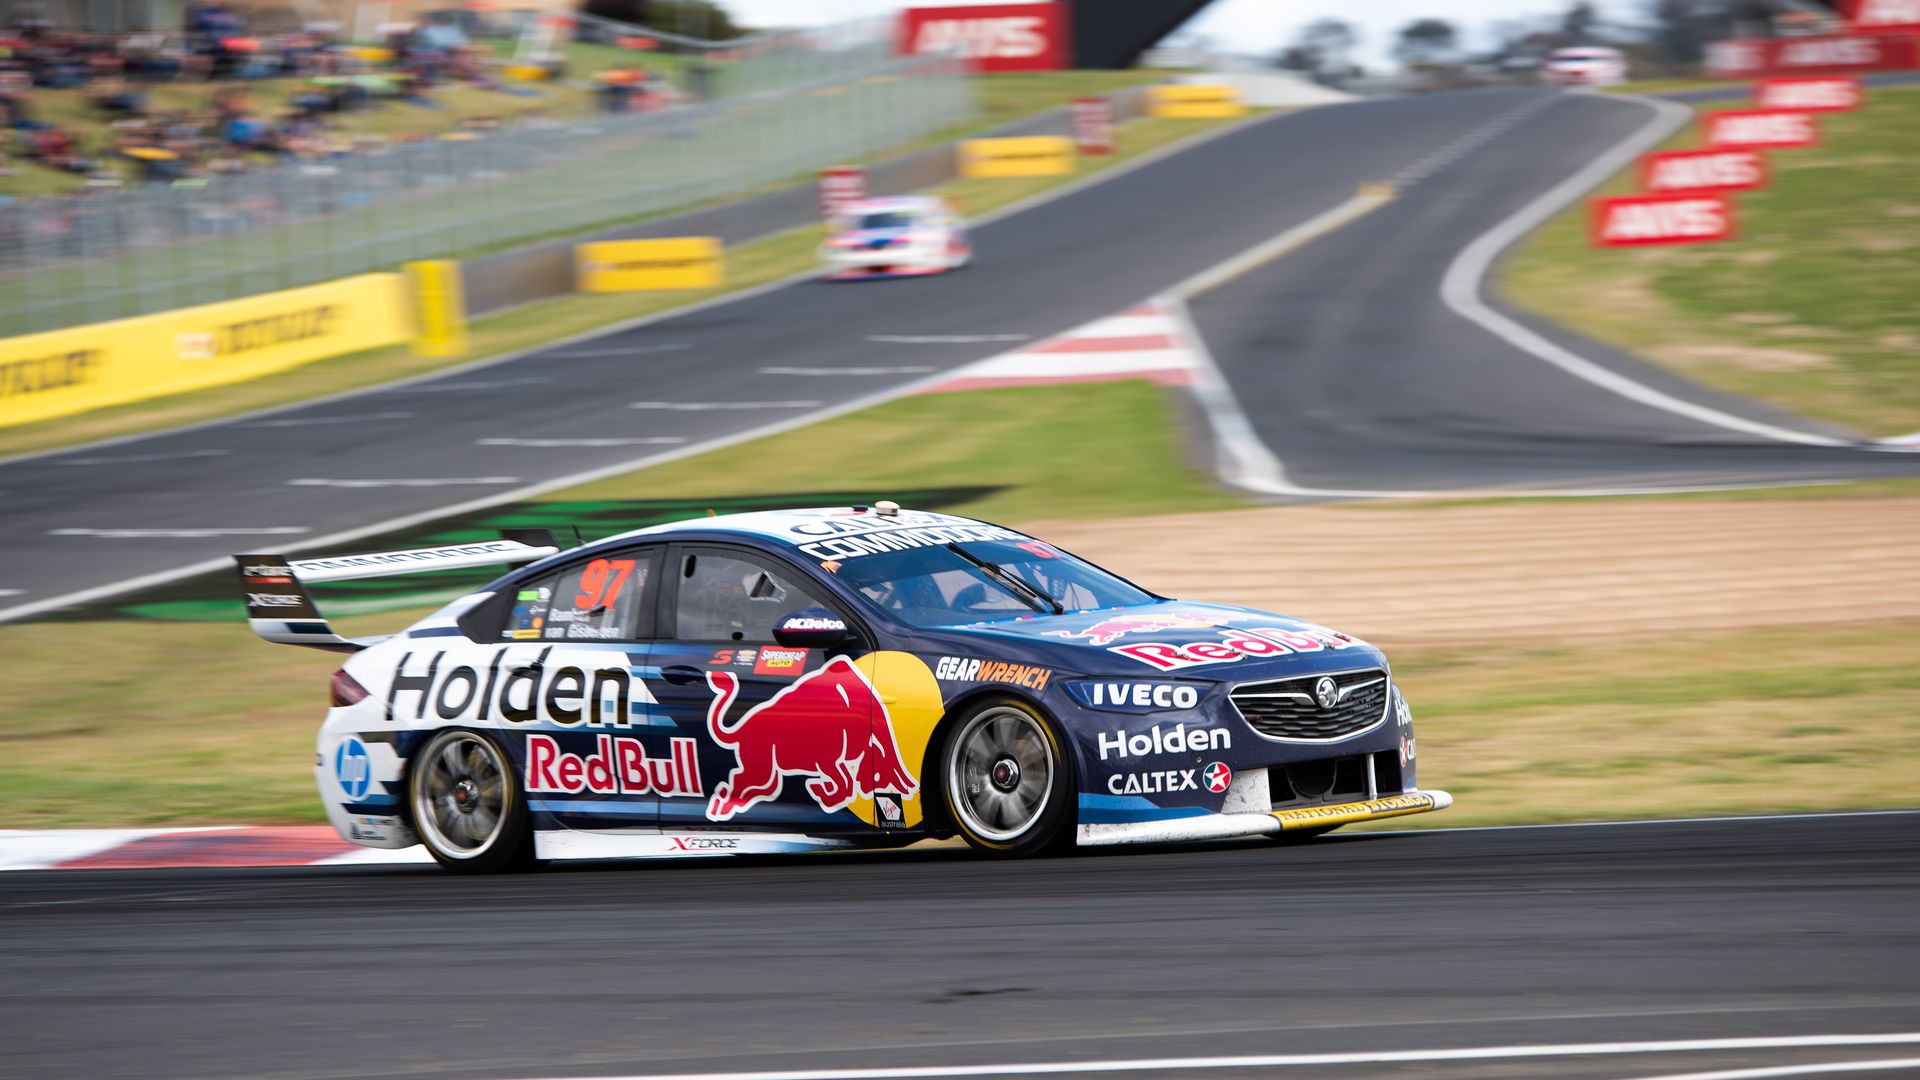 A Holden Commodore a at the Supercheap Auto Bathurst 1000 V8 Supercar Race at Mount Panorama Circuit in Bathurst, Australia. (Photo by Speed Media/Icon Sportswire via Getty Images)